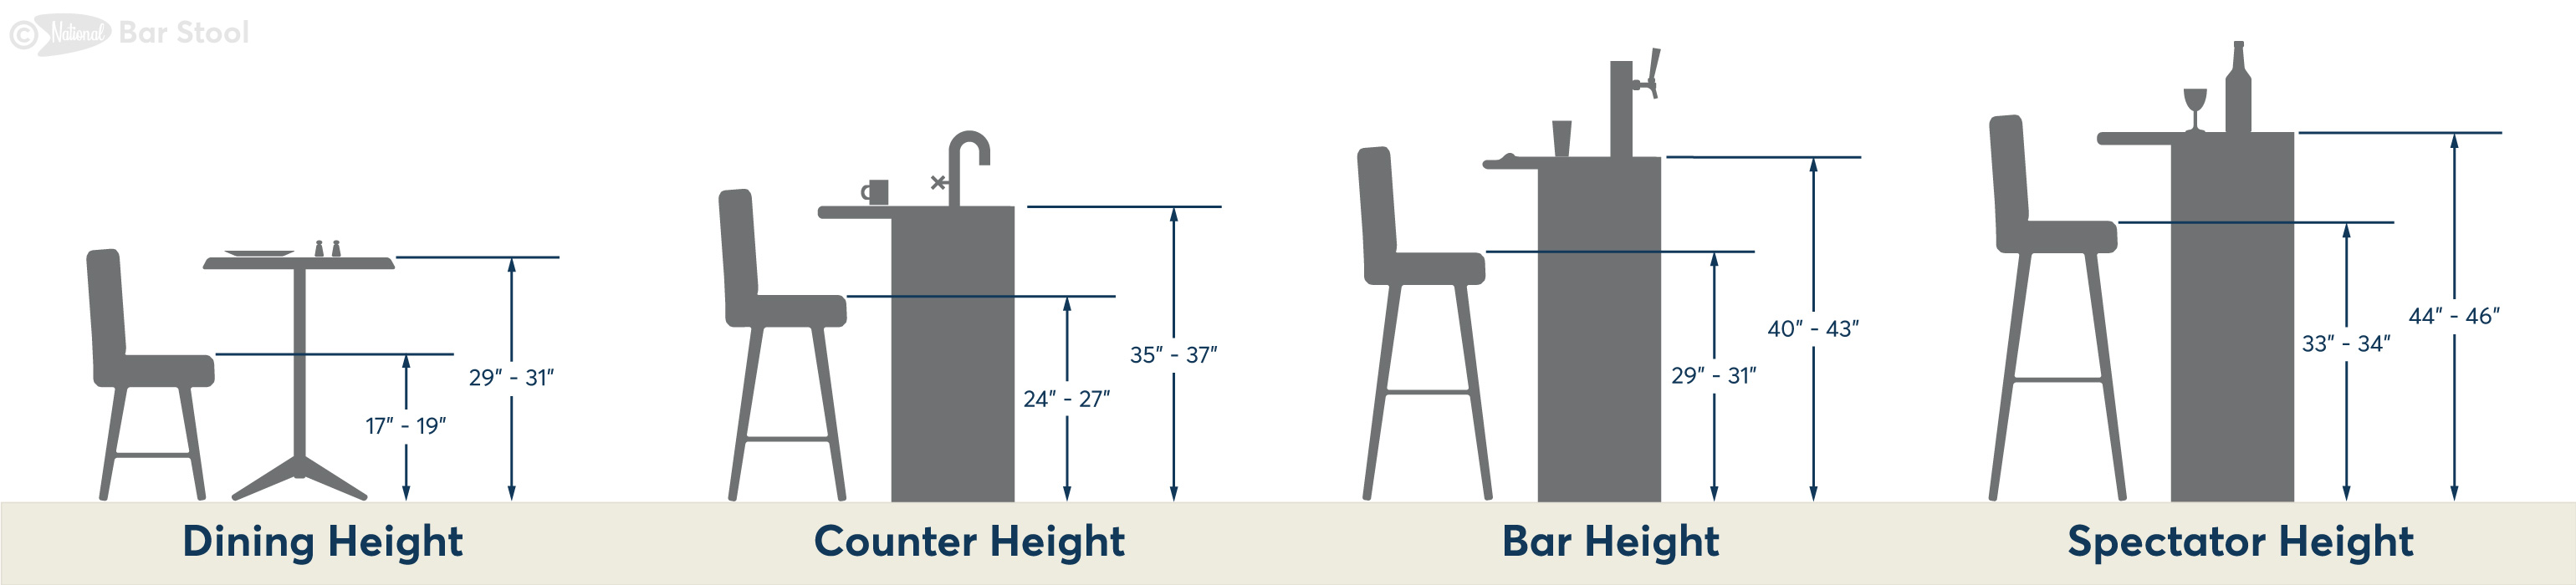 Bar Stool Ing Guide National, How To Measure Correct Bar Stool Height